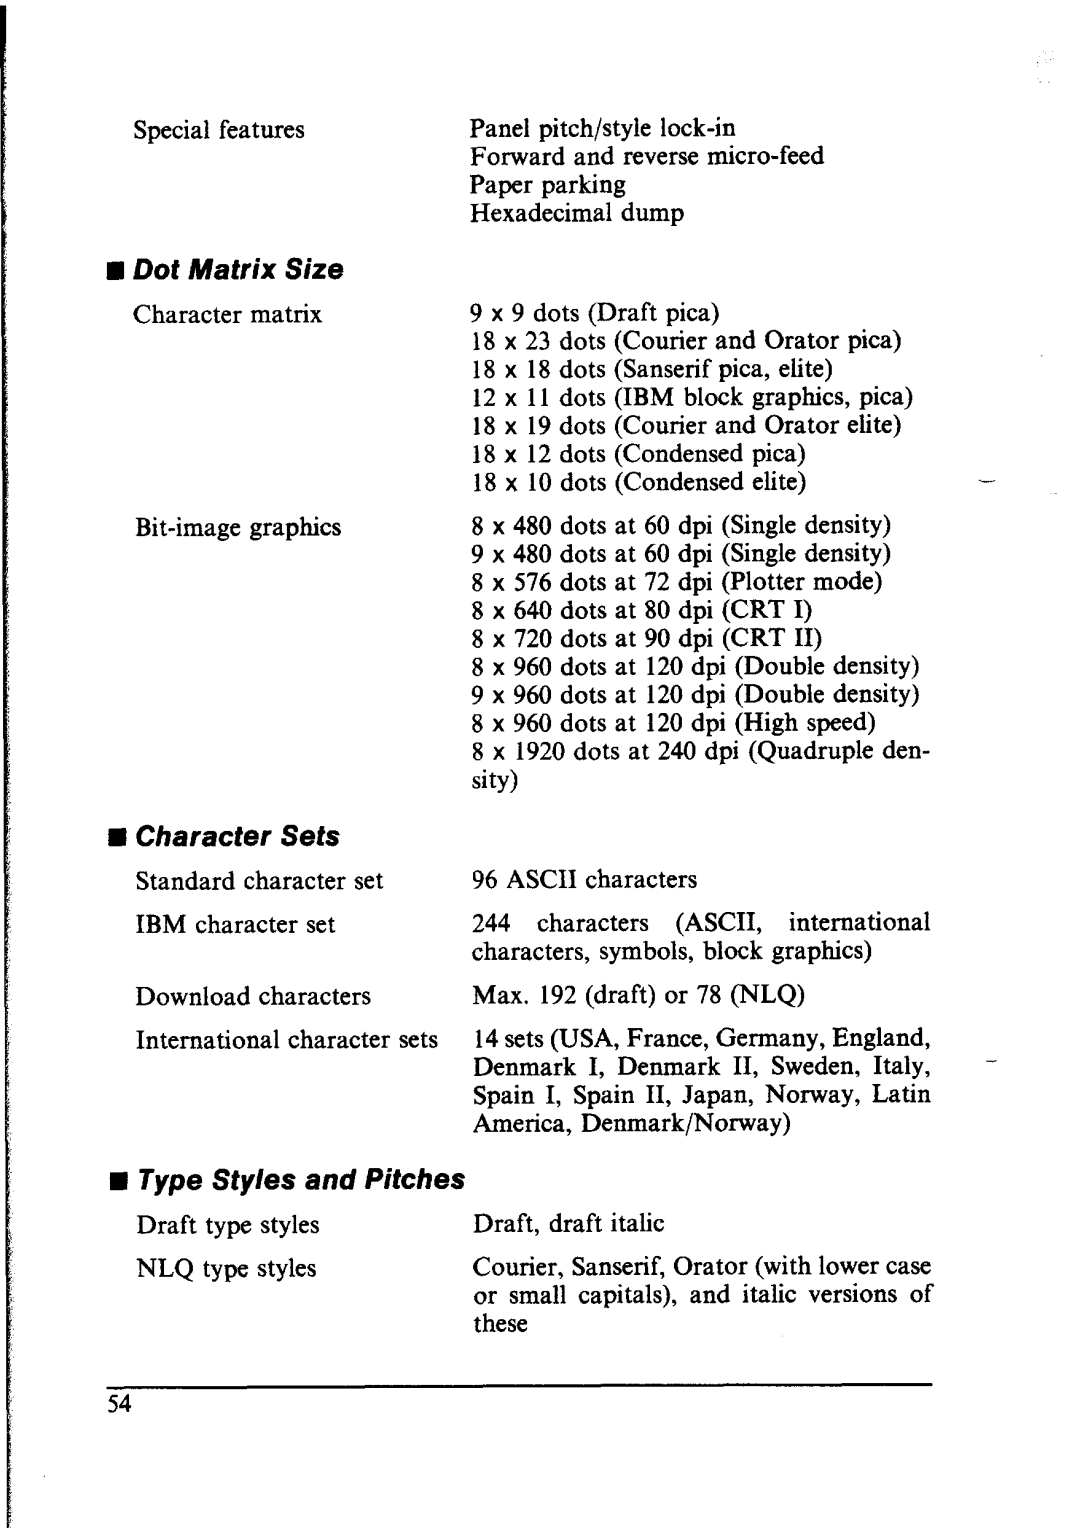 Star Micronics NX-1000 manual Dot Matrix Size, n Character Sets, n Type Styles and Pitches 